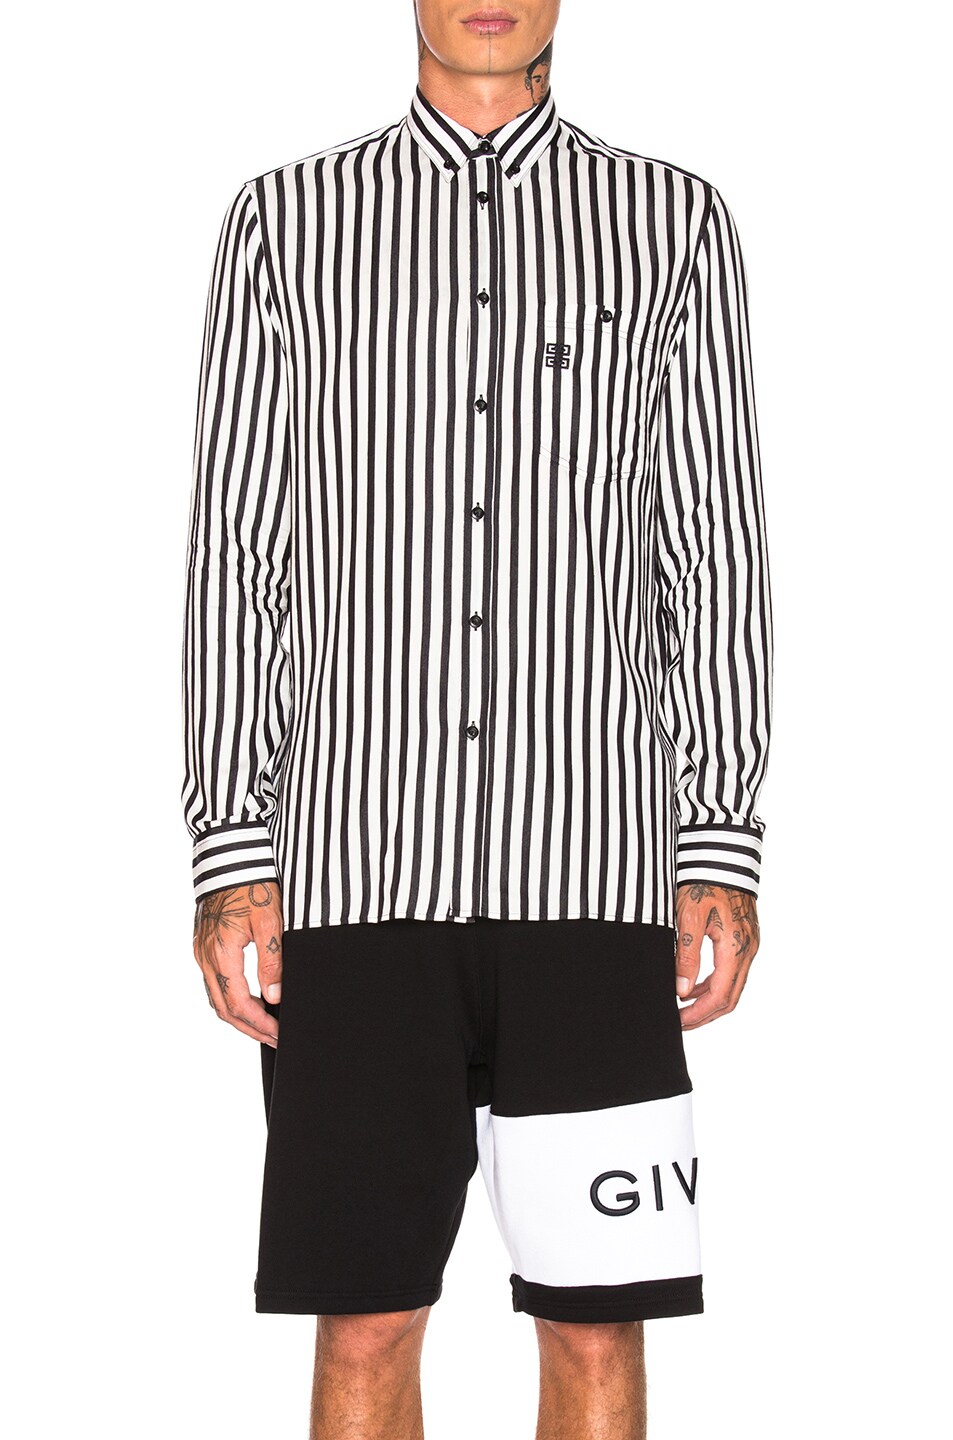 Givenchy Striped Shirt in Black and White | FWRD